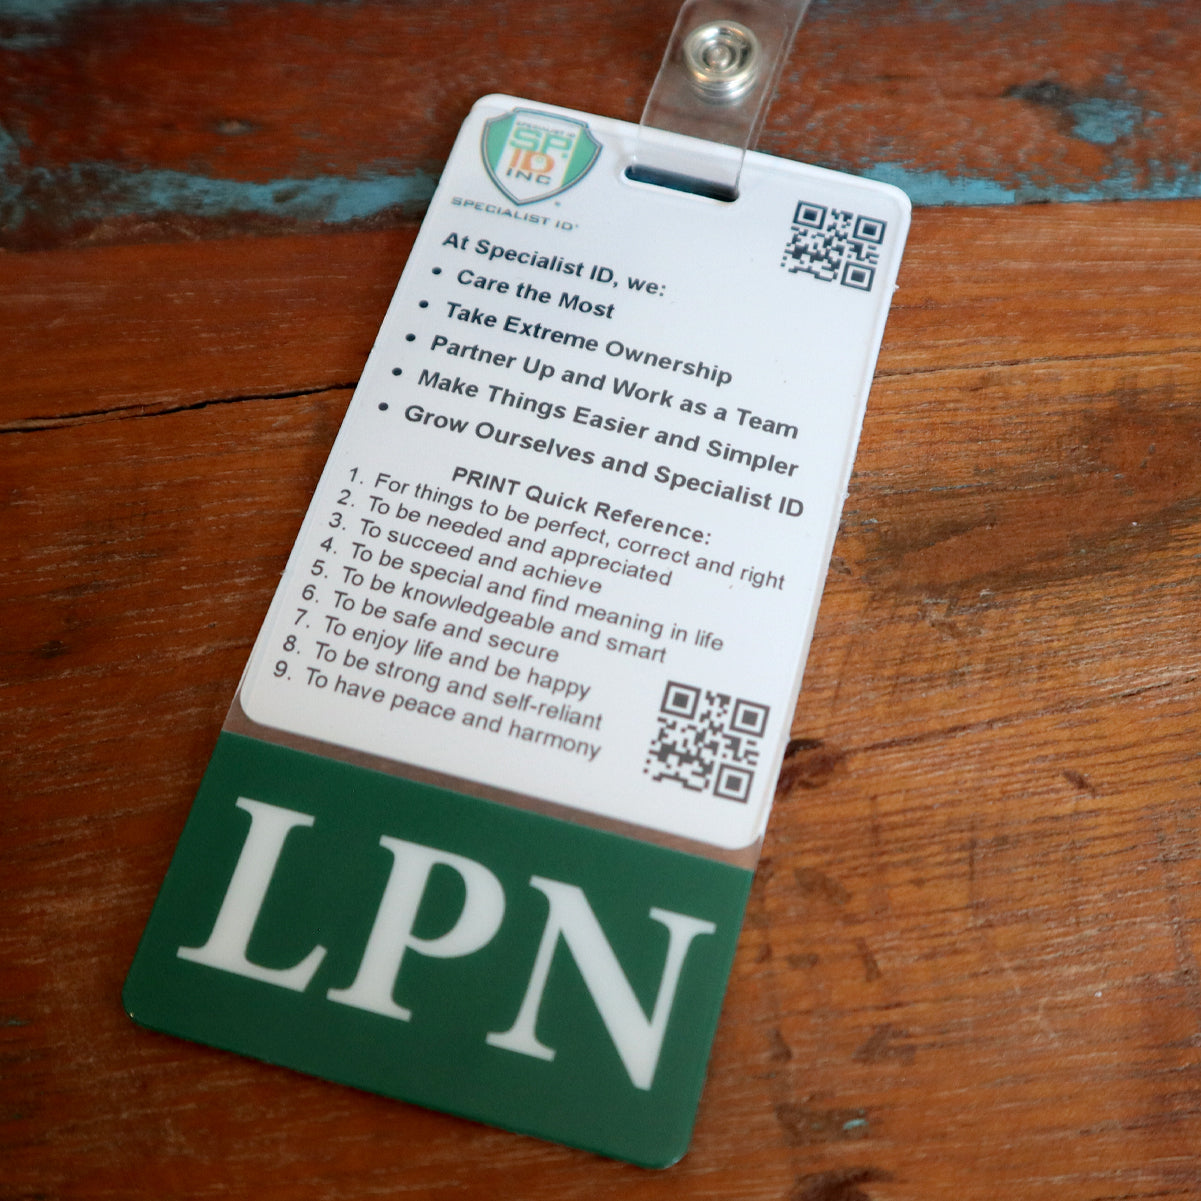 Photo of a vertical ID badge, labeled "LPN" at the bottom. The Clear LPN Badge Buddy Vertical with Green Border for Licensed Practical Nurses lists company values and provides a quick reference guide for success, highlighting teamwork, ownership, and personal growth for Licensed Practical Nurses.